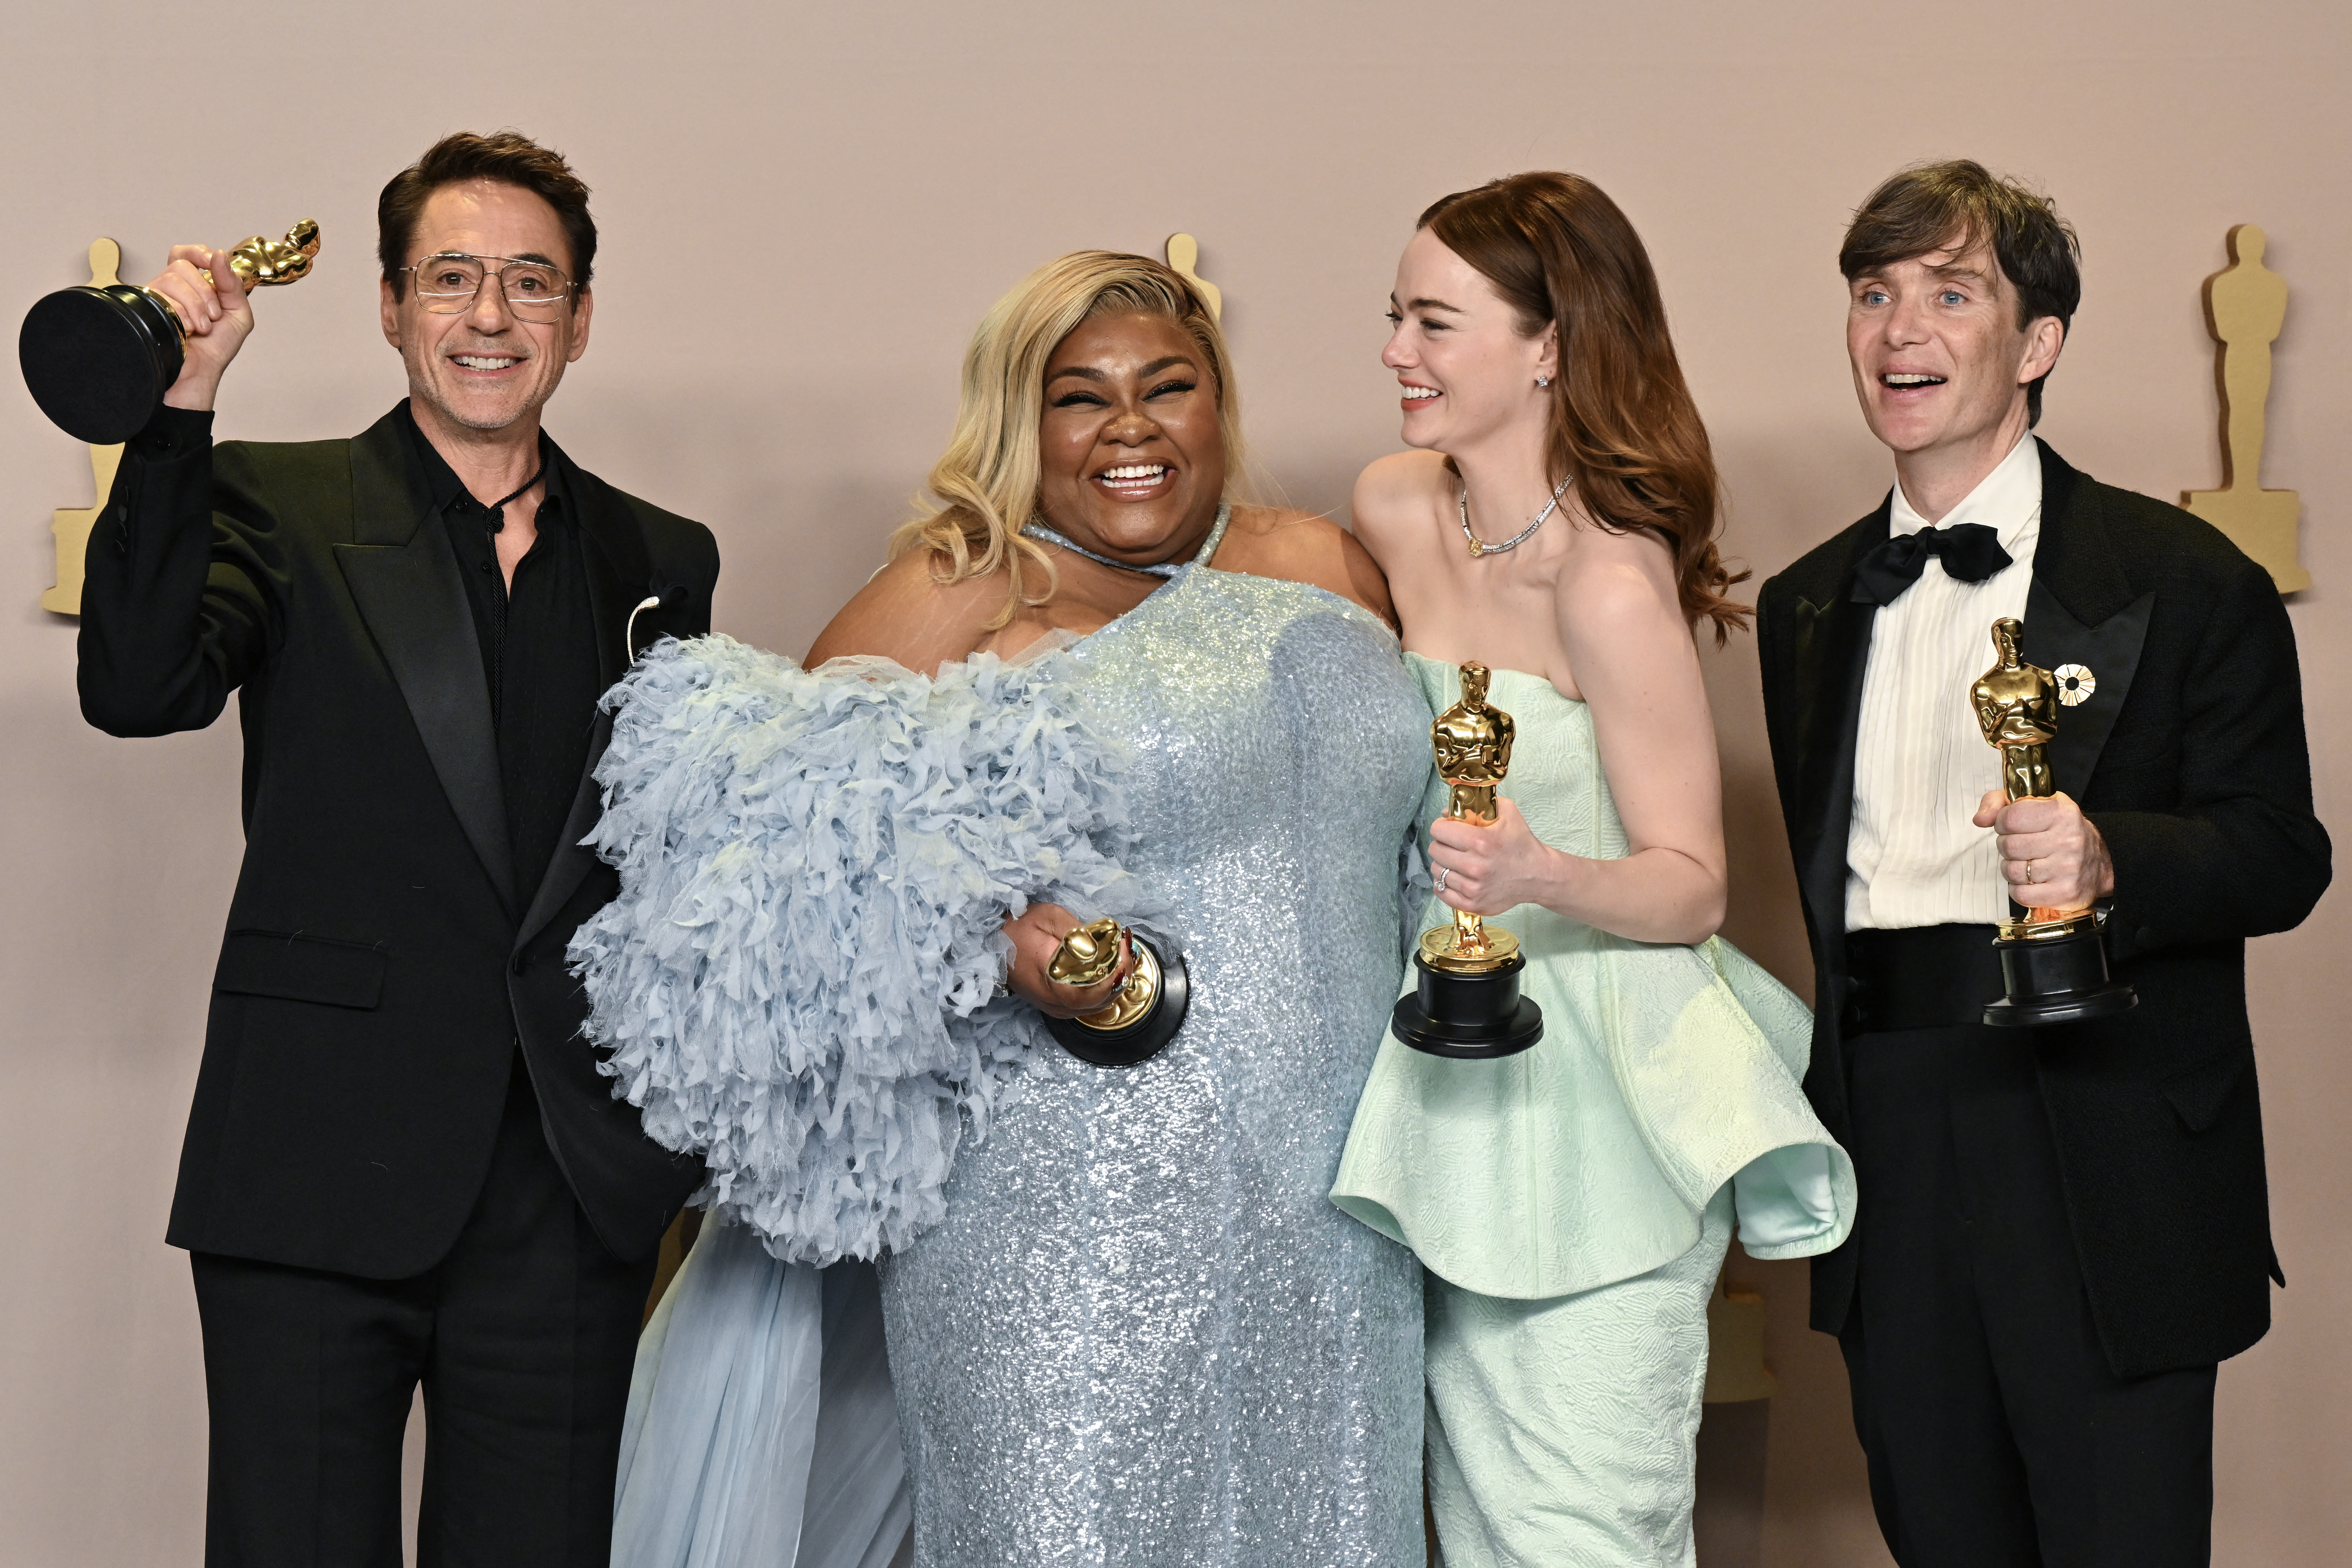 Best Actress for “Poor Things” actress Emma Stone, Best Actor for “Oppenheimer” actor Cillian Murphy, Best Supporting Actress for “The Holdovers” actress Da’Vine Joy Randolph and Best Supporting Actor for “Oppenheimer” actor Robert Downey Jr. pose in the press room during the 96th Annual Academy Awards.